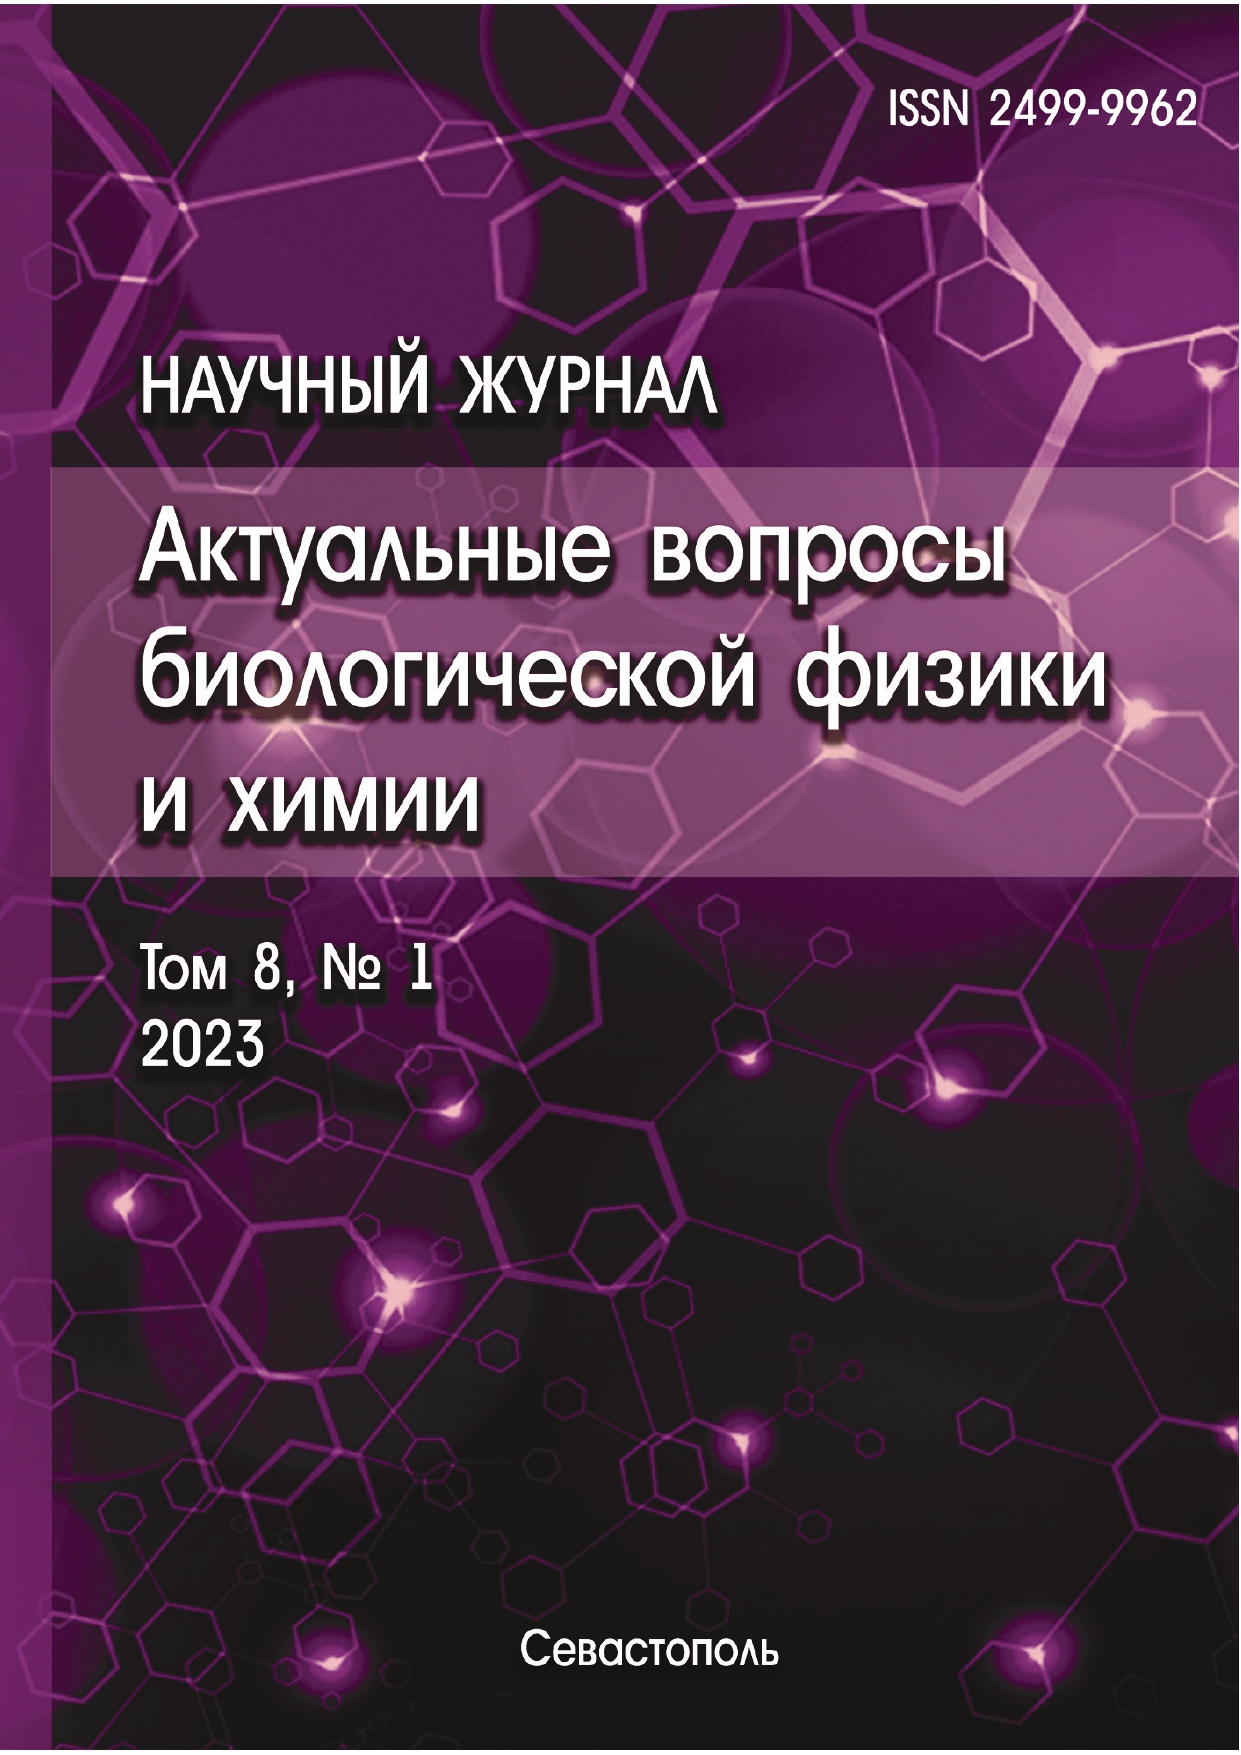                         Russian Journal of Biological Physics and Chemisrty
            